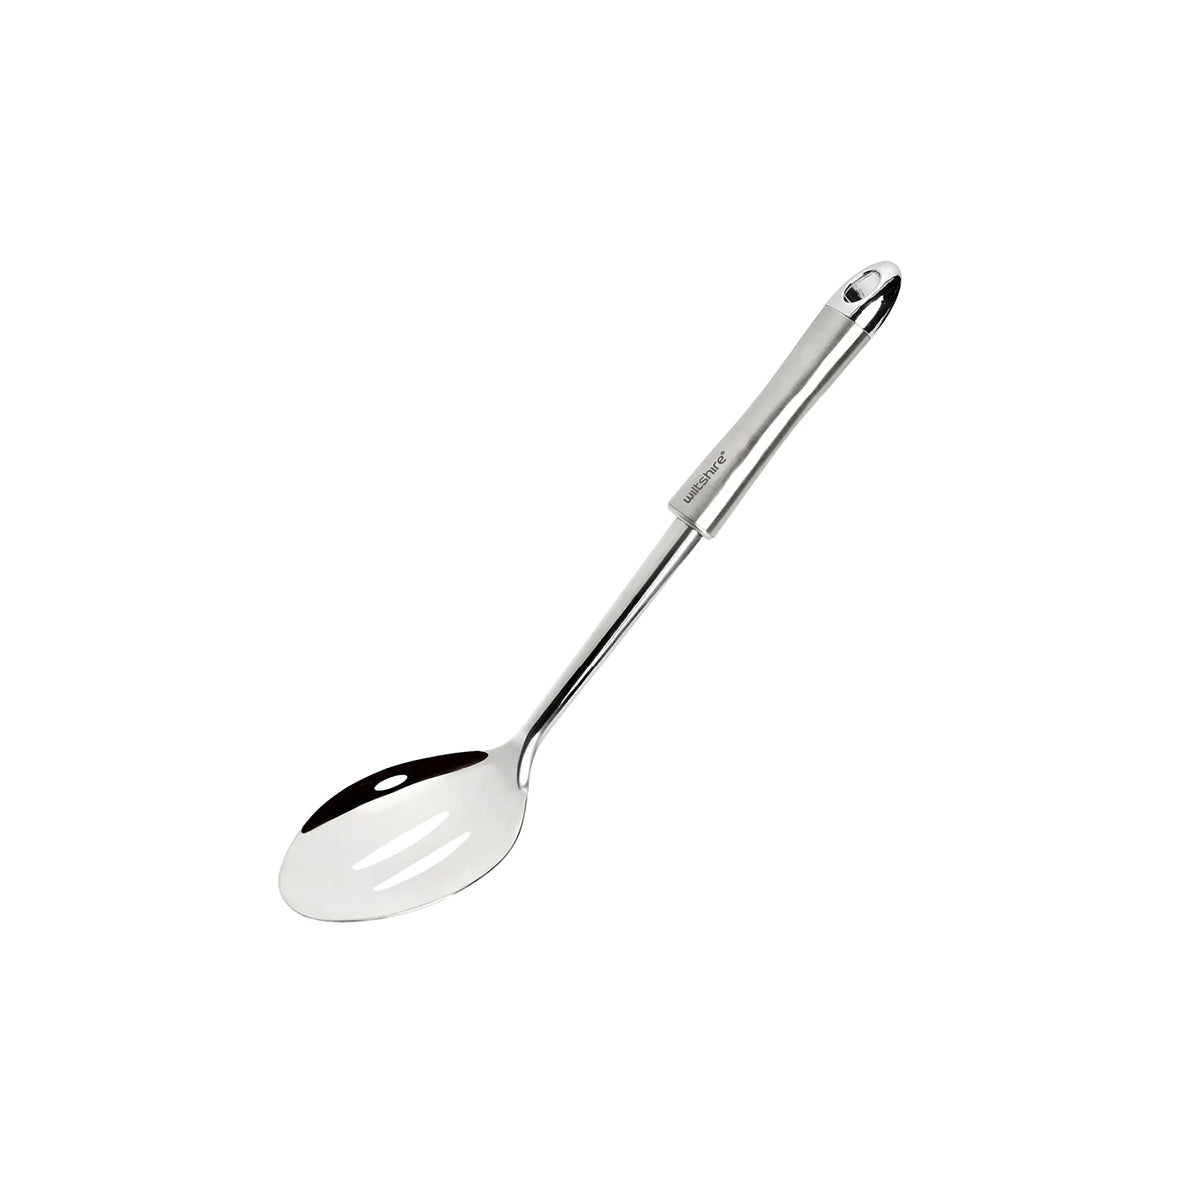 WLT43753 Wiltshire Industrial Slotted Spoon Stainless Steel Tomkin Australia Hospitality Supplies